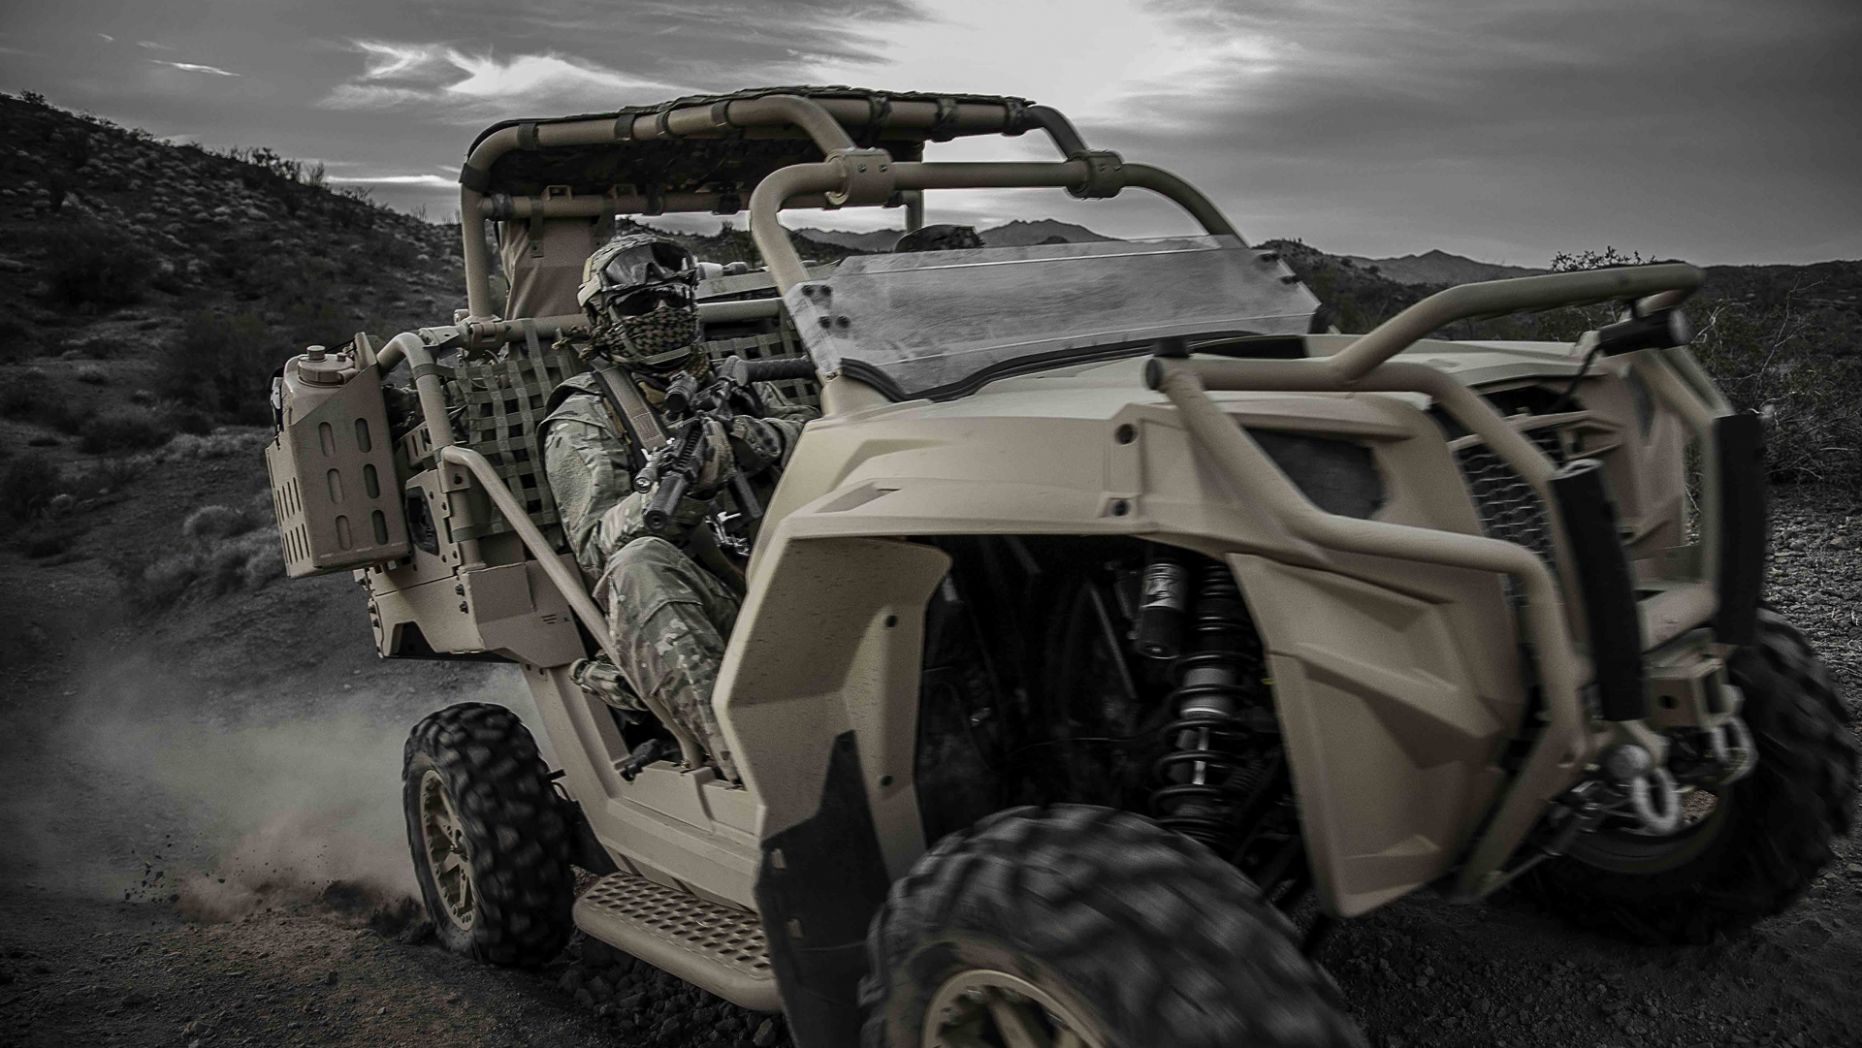 AUSA 2017: This military ATV can ‘think’ and drive itself